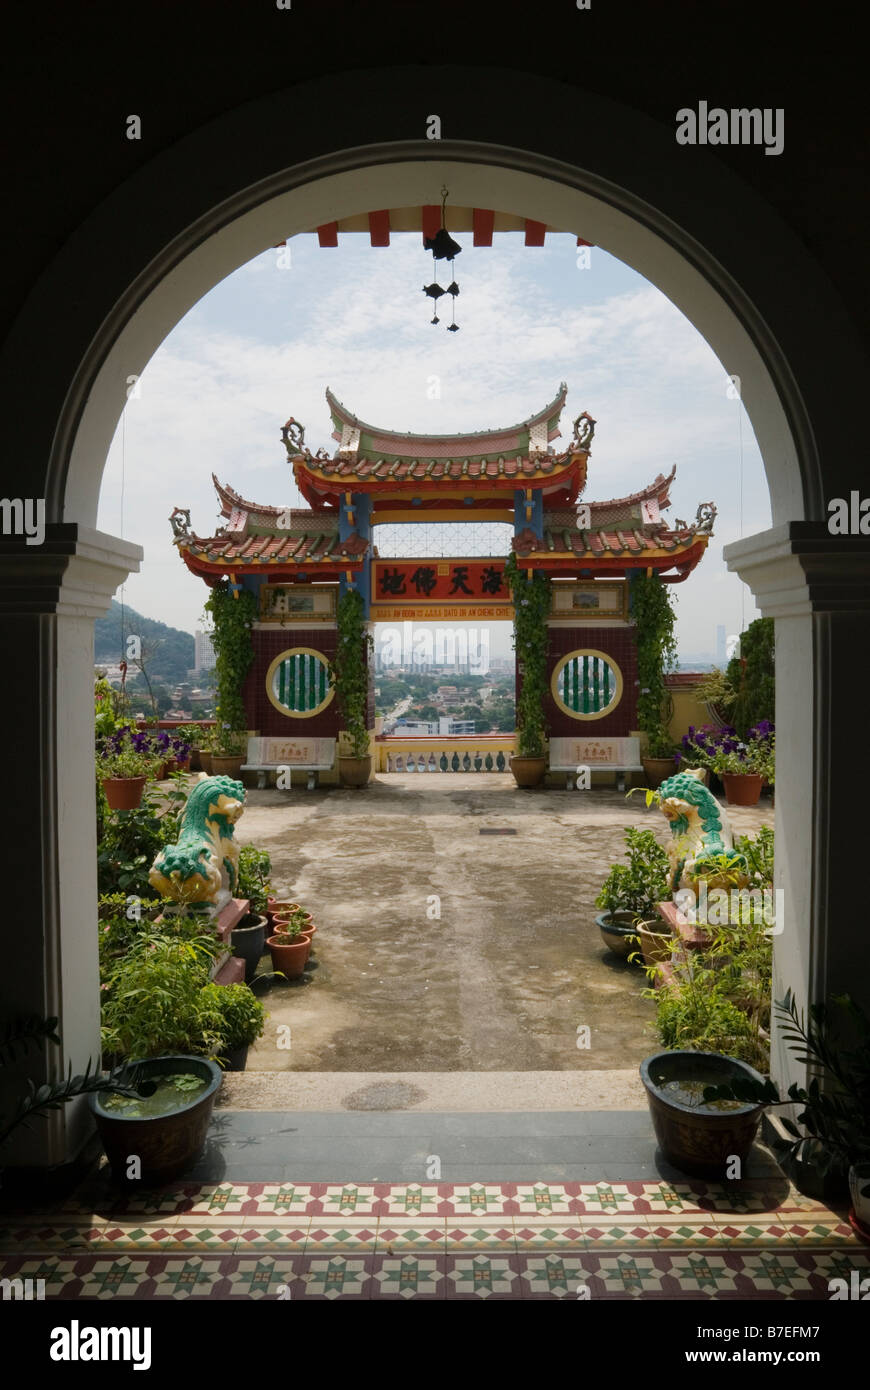 An arched doorway frames a traditional ornate gateway with views over Georgetown at the Buddhist Kek Lok Si Temple, Air Itam, Penang, Malaysia Stock Photo